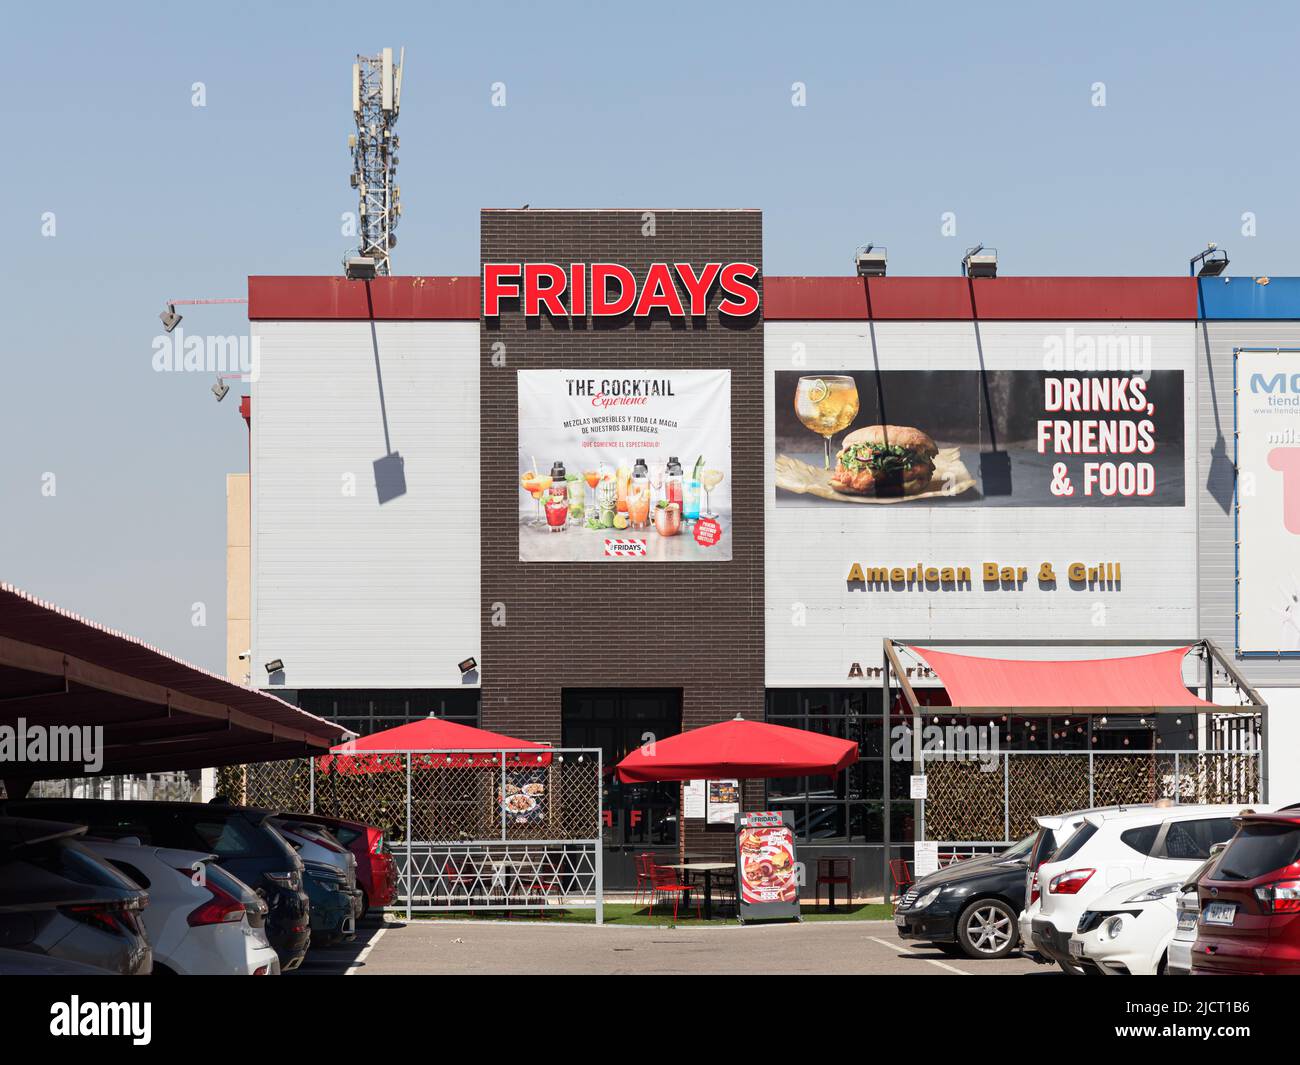 ALFAFAR, SPAIN - JUNE 06, 2022: Fridays is an American restaurant chain focusing on American cuisine and casual dining Stock Photo